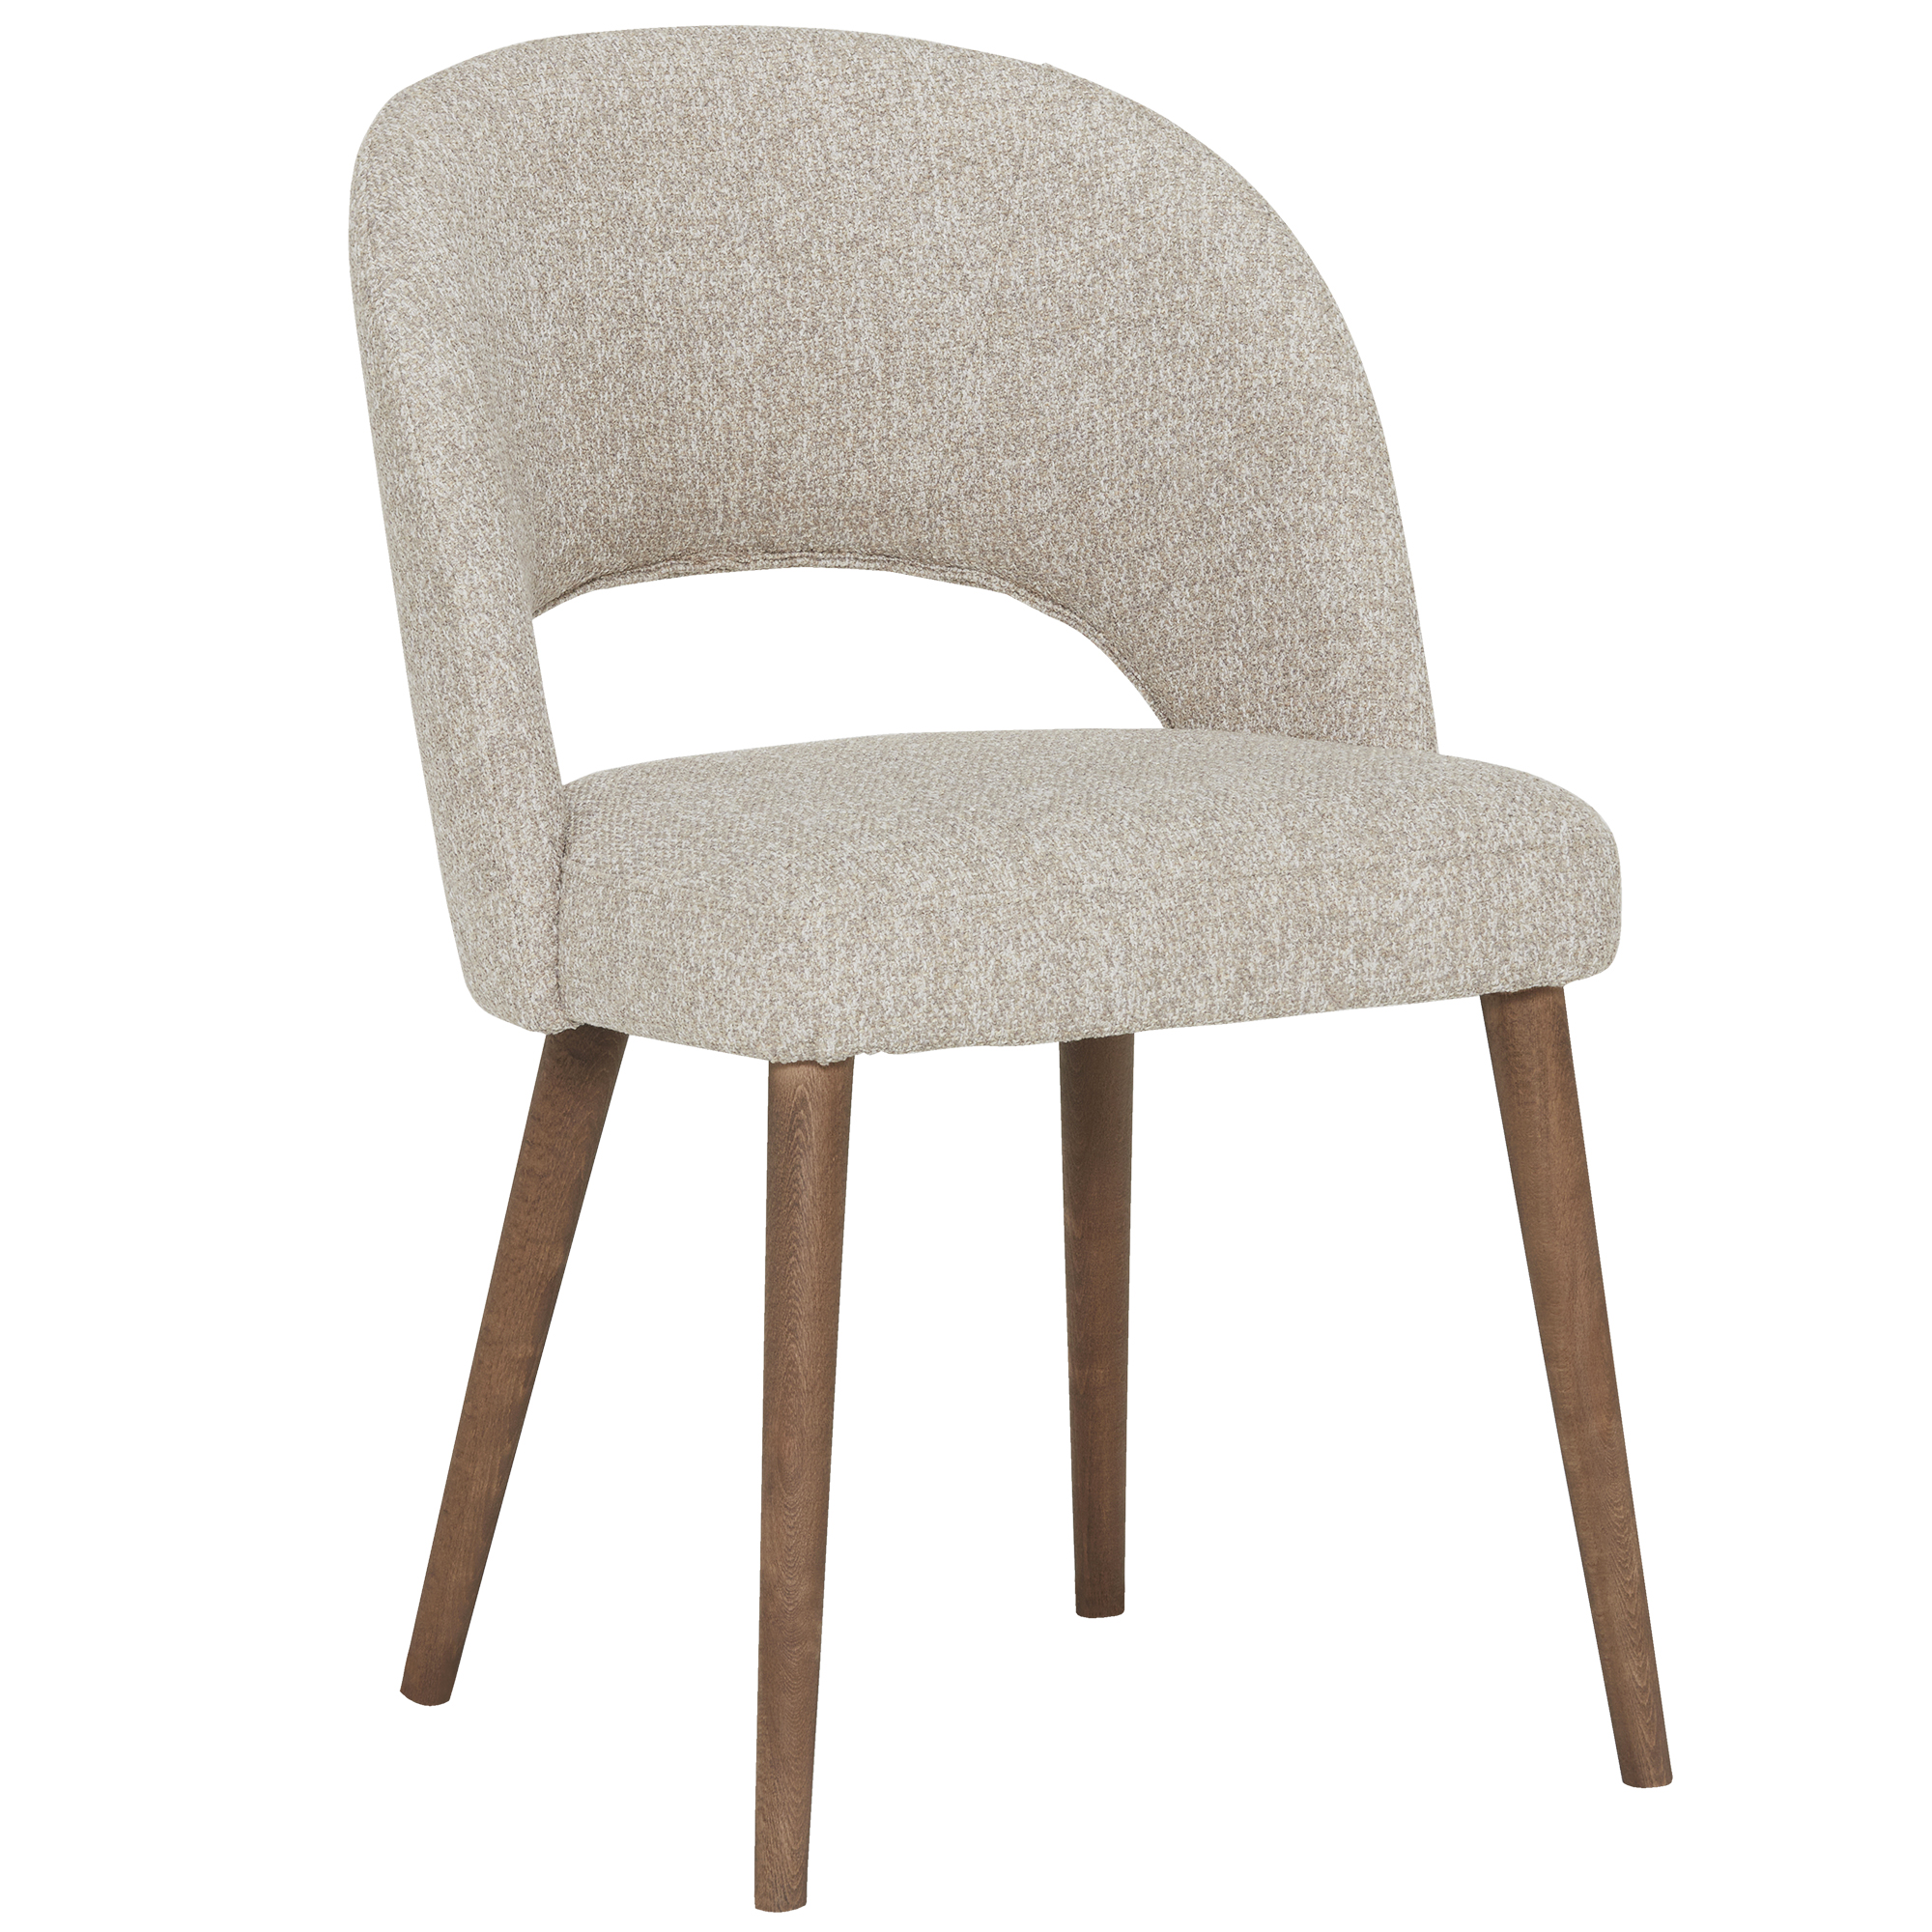 Pure Furniture Beck Dining Chair With Wooden Legs, Neutral | Barker & Stonehouse